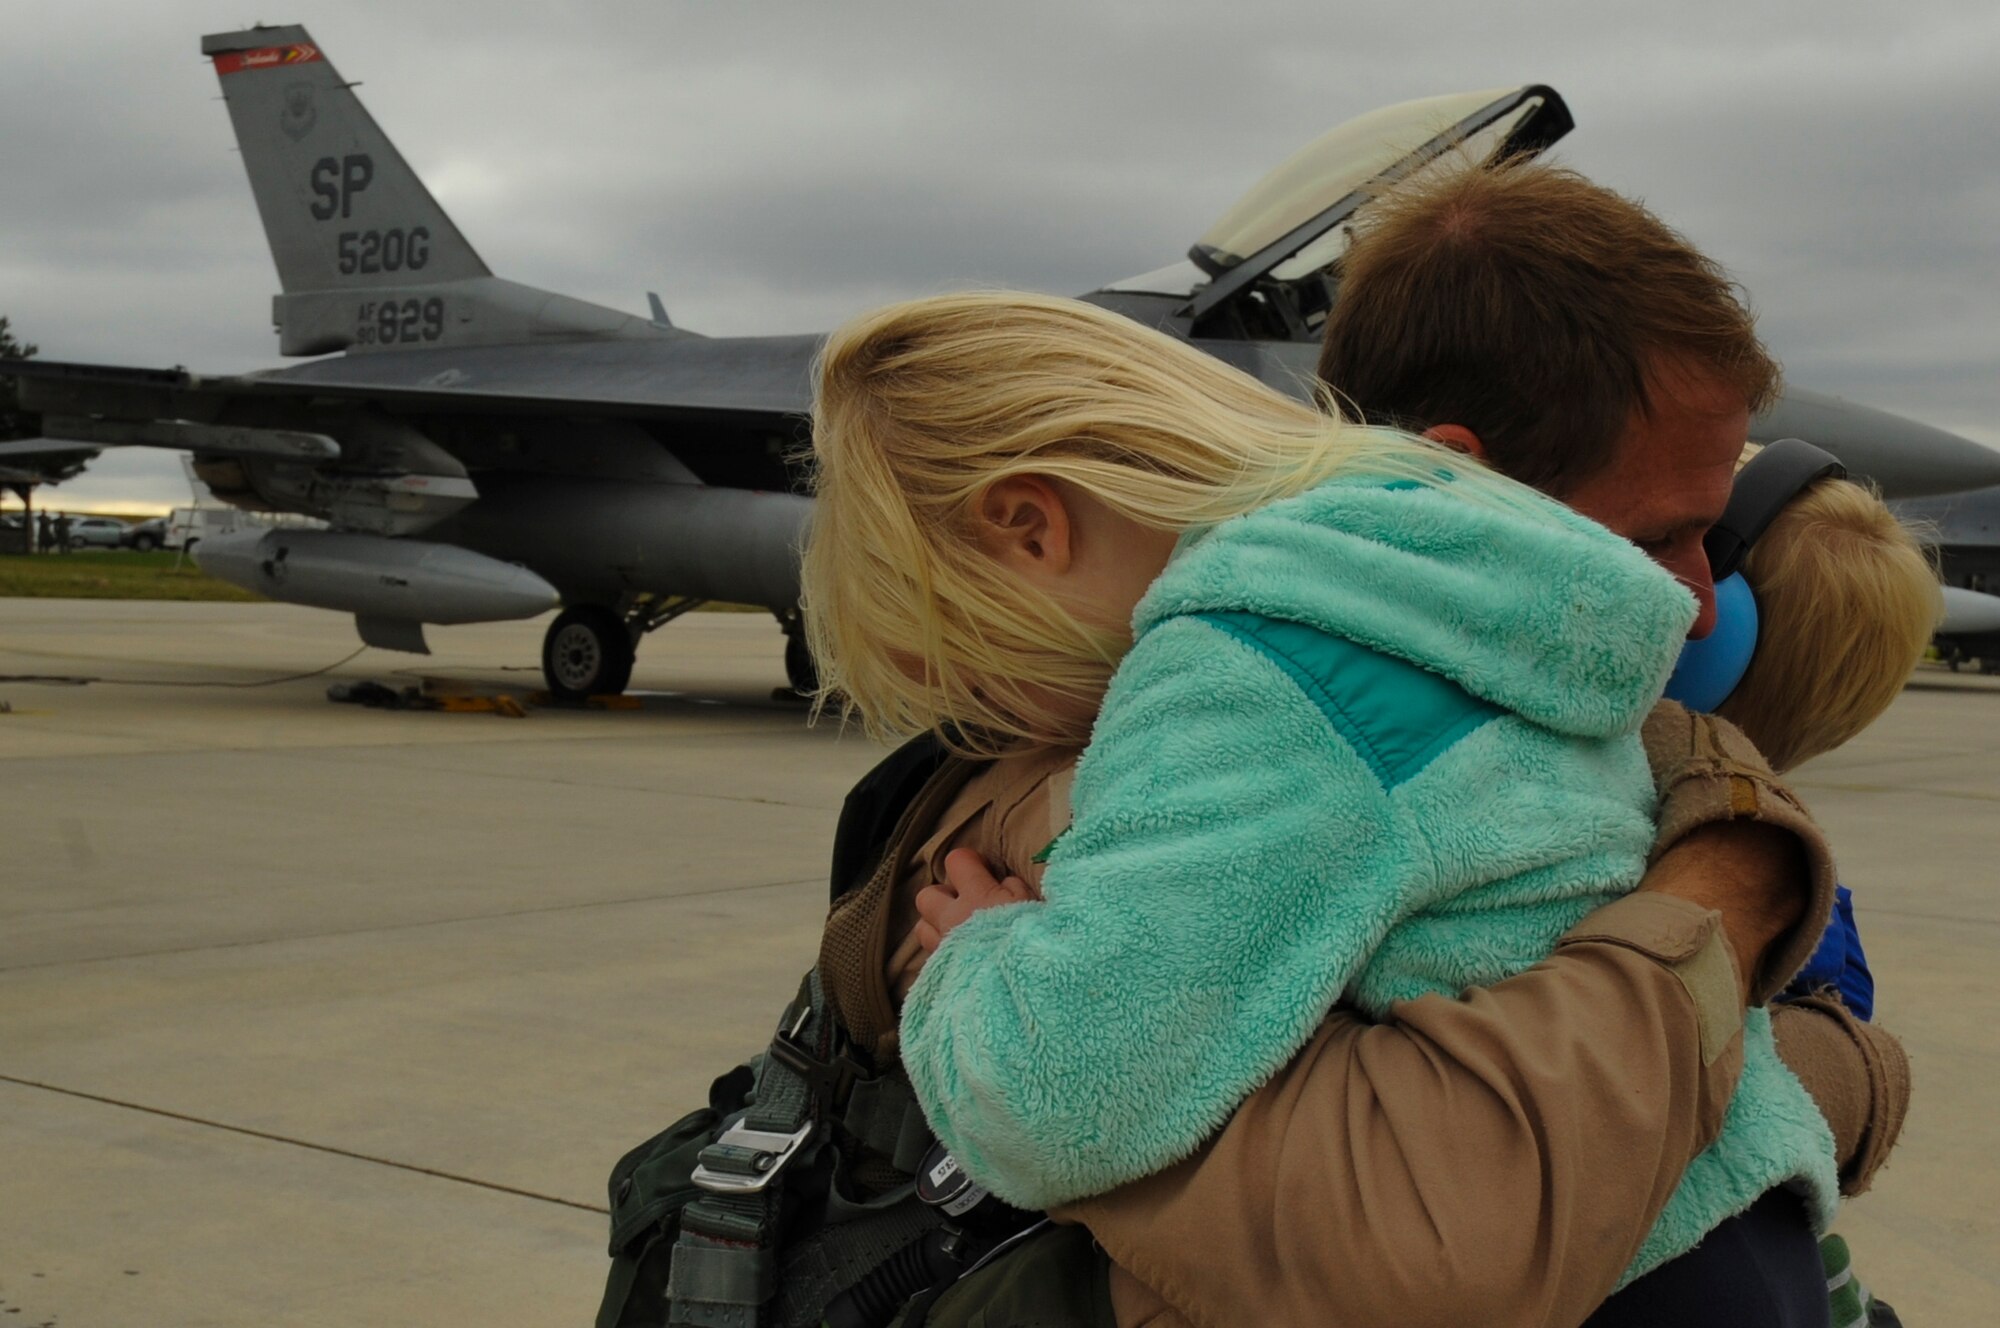 An Airman assigned to the 480th Expeditionary Fighter Squadron reunites with his children during the squadron’s return to Spangdahlem Air Base, Germany, Oct. 6, 2016. Approximately 300 of the Airmen, who serve in flight, maintenance or support roles for the F-16 Fighting Falcon fighter aircraft, completed a six-month deployment to Southwest Asia by providing close air support and dynamic targeting operations as part of the squadron’s first deployment in support of Operation Inherent Resolve. Operation Inherent Resolve aims to eliminate the Da'esh terrorist group and the threat they pose to Iraq, Syria and the wider international community. (U.S. Air Force photo by Staff Sgt. Joe W. McFadden)